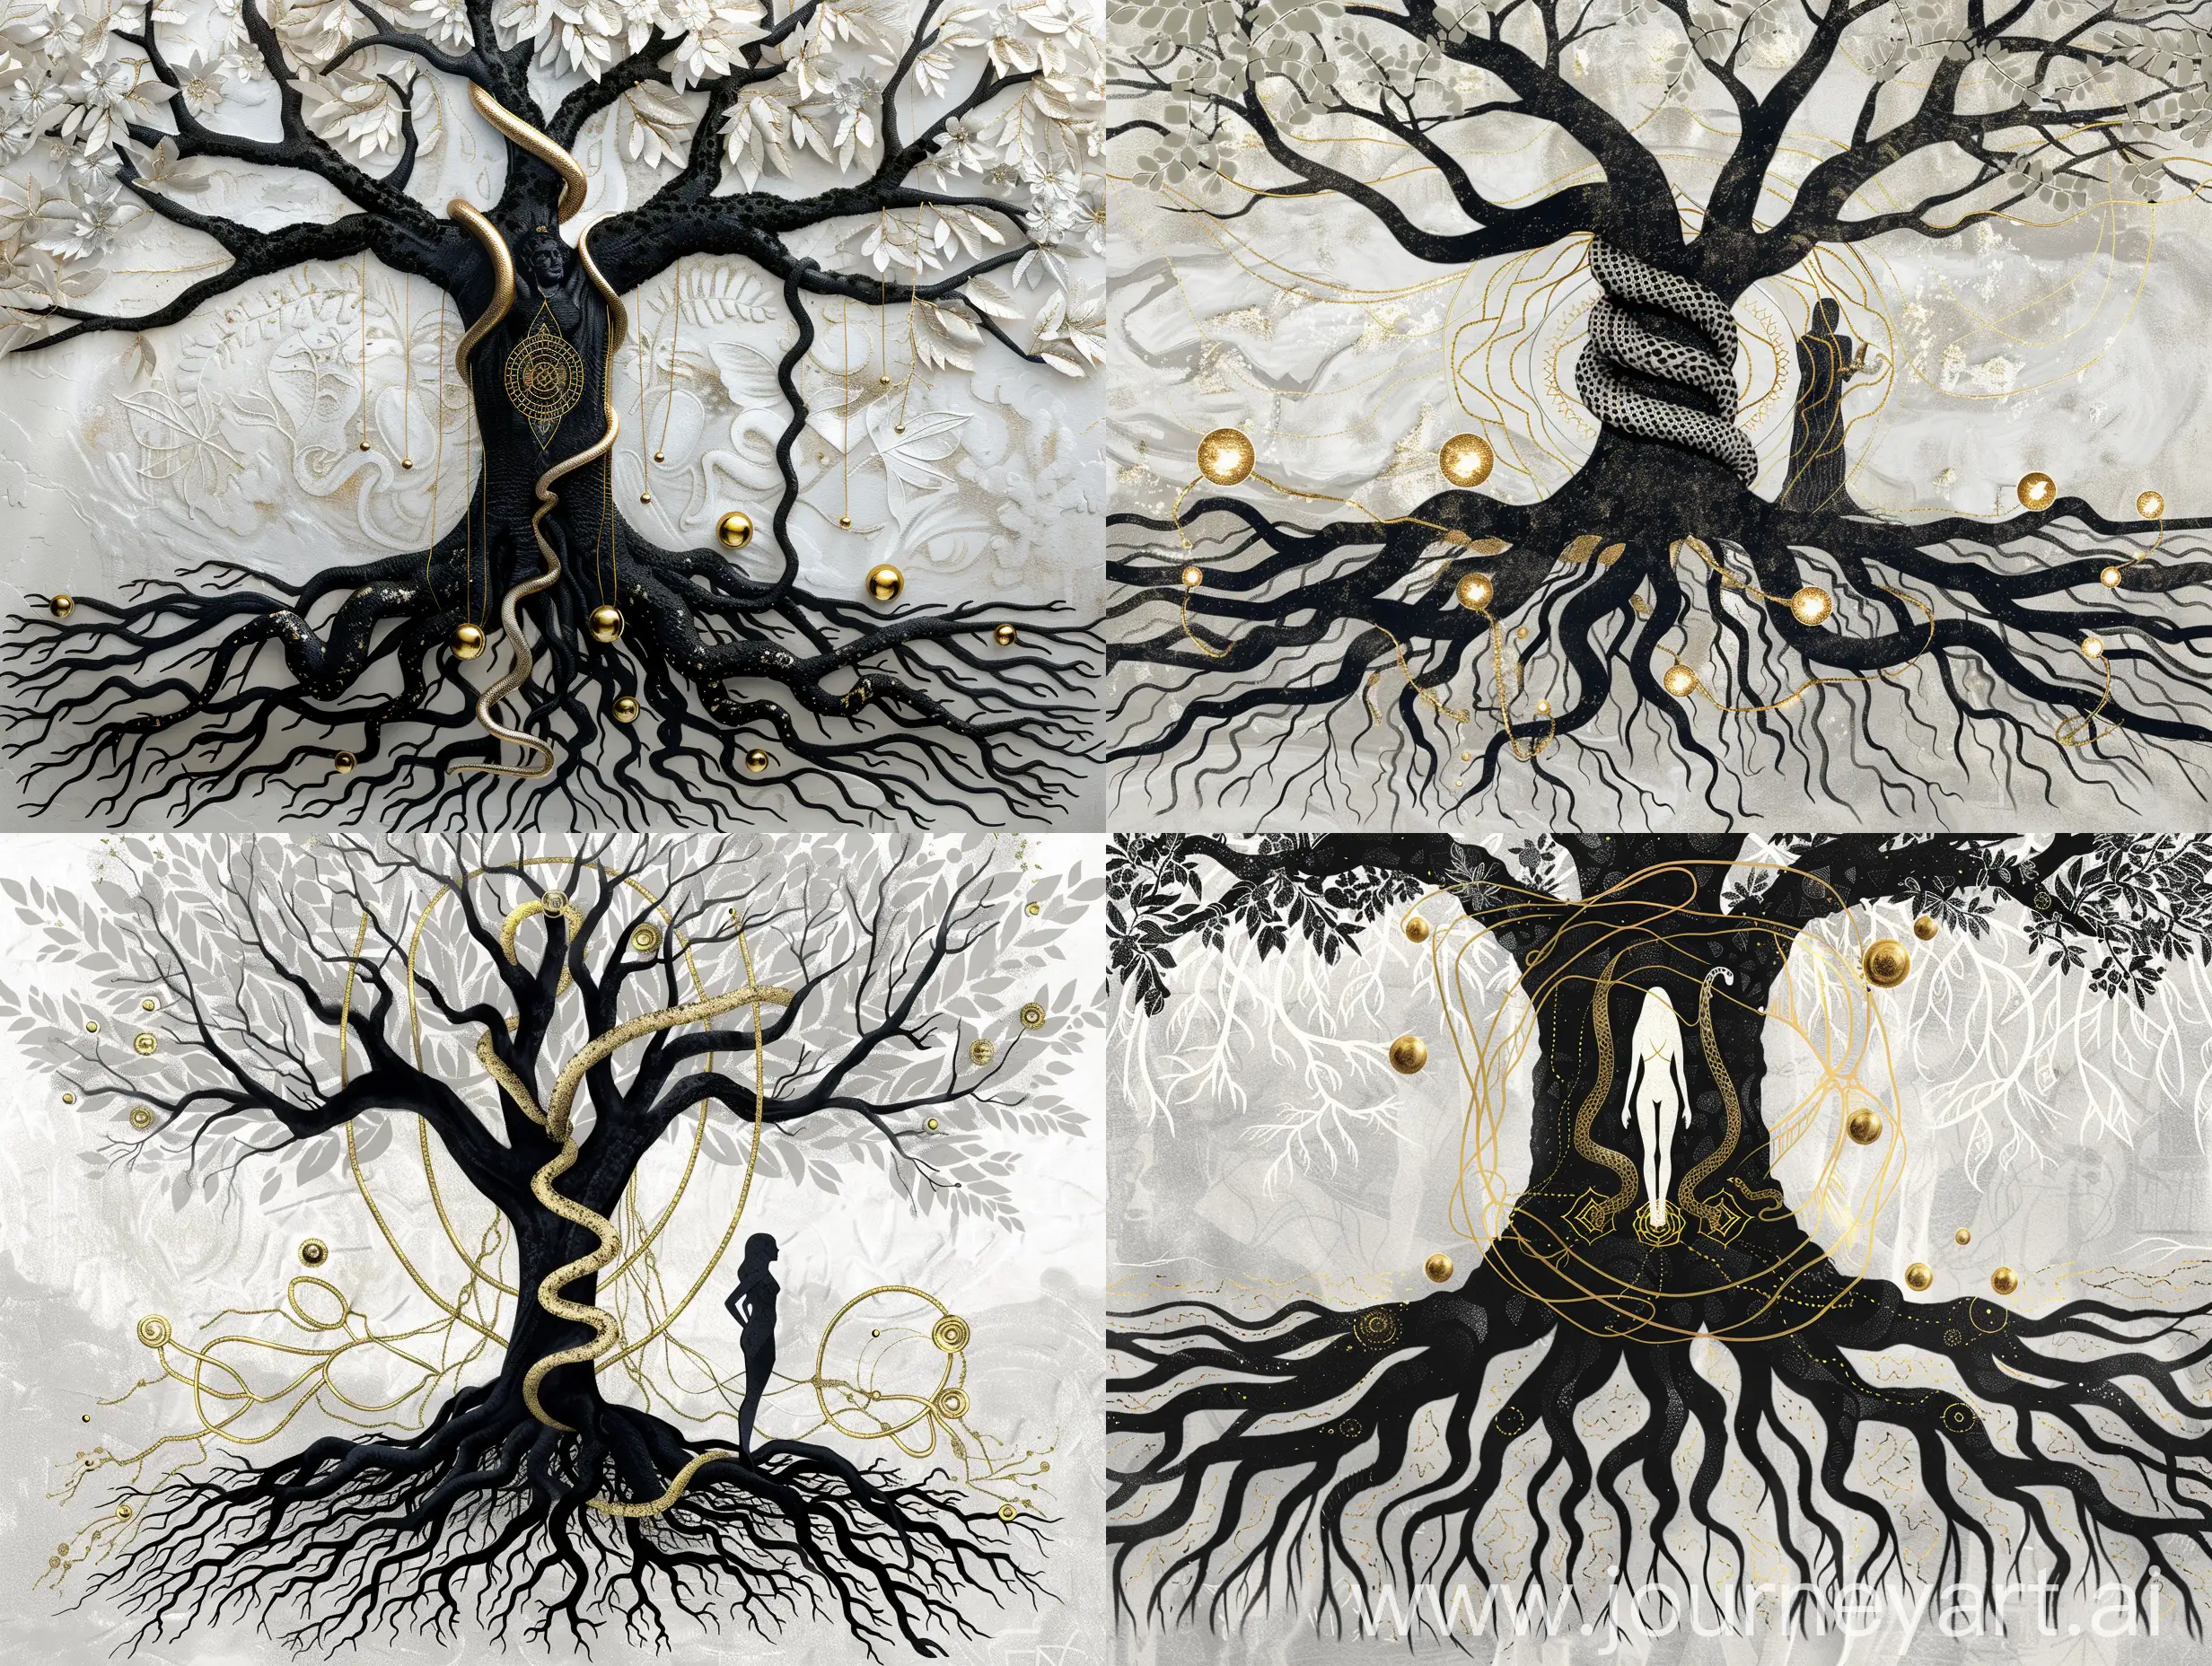 a monochrome tree with black roots and white branches the black symbolising the unconscious mind and the conscious mind the roots reaching to hell and the branches reaching to heaven with a serpent wrapping from the roots around the trunk and all the way to the branches. the trunk is thick and the serpent has a thick body. there is female. similar to the carl Jung tree. there are gold lines and roots amongst the tree leaves and roots. there is a woman's shadow figure in the centre of the tree with the snake also wrapped around her her chakras are lit up in gold ball orbs and there are 7 chakra rings circled around her to represent her aura